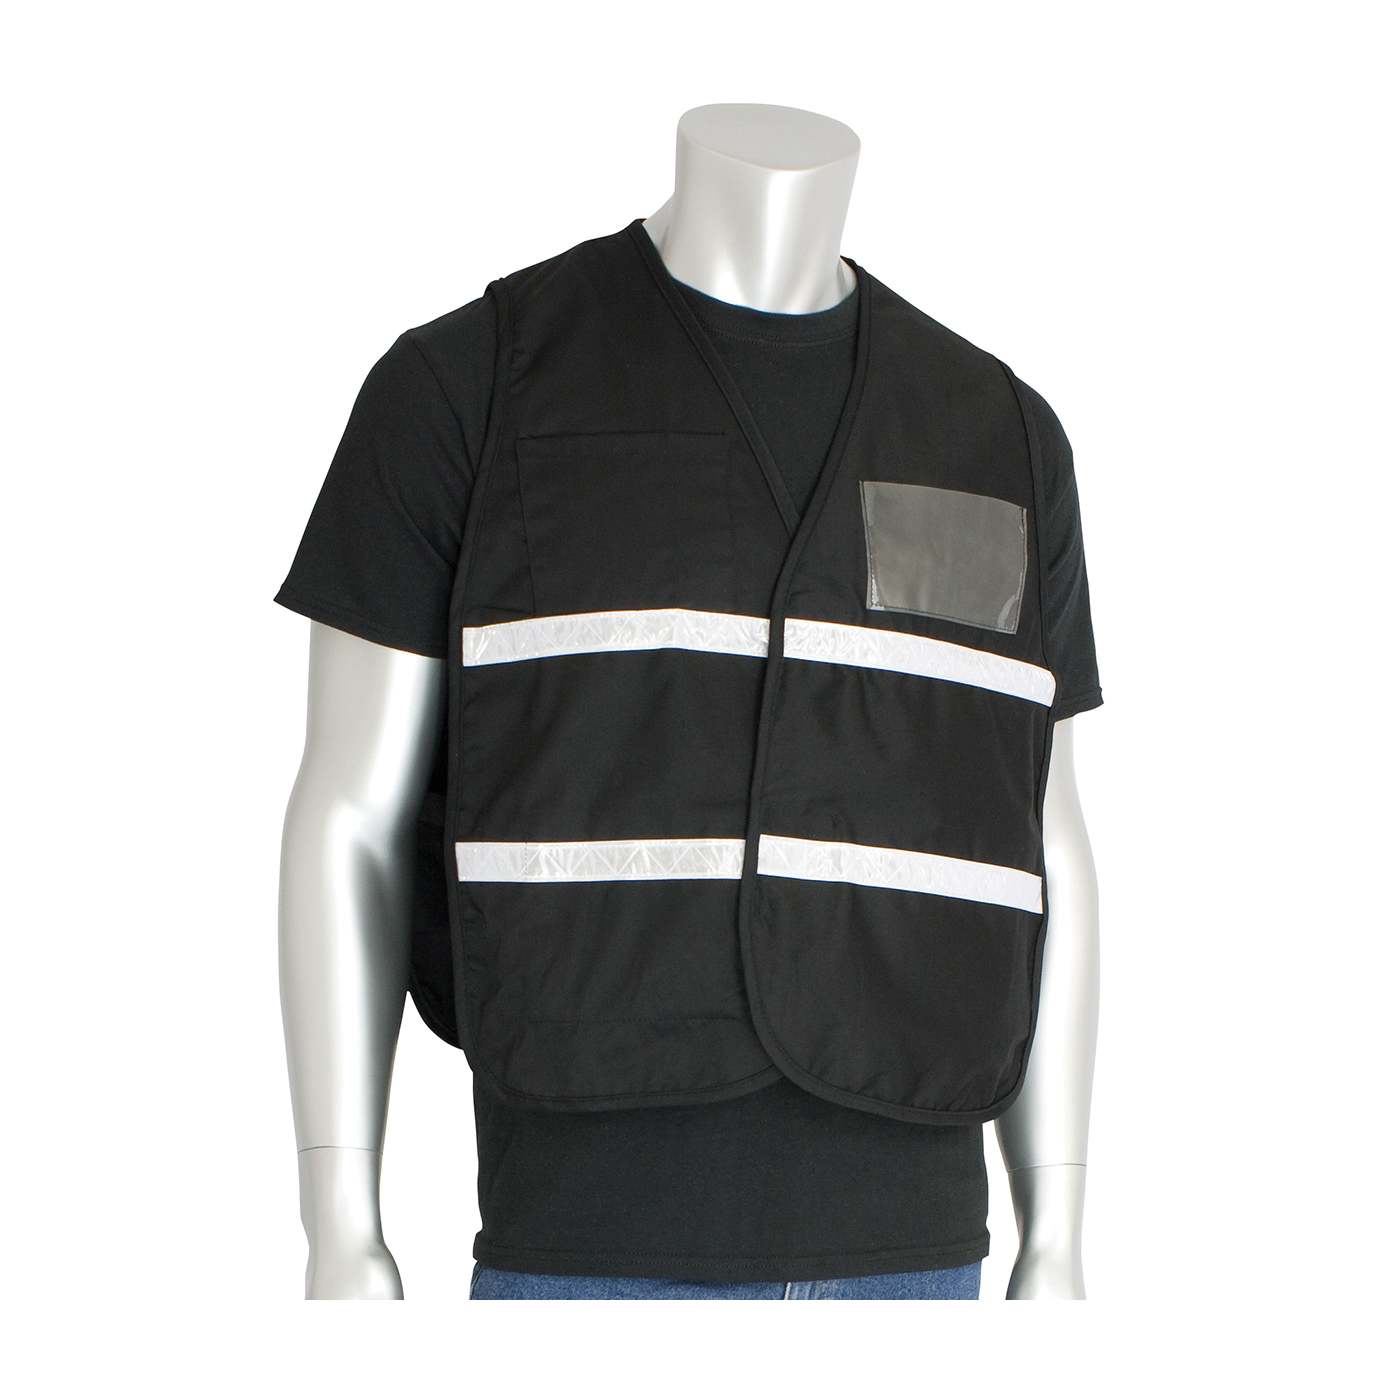 PIP® 300-2502 Non-ANSI Incident Command Vest, Black, 35% Cotton/65% Polyester, Hook and Loop Closure, 4 Pockets